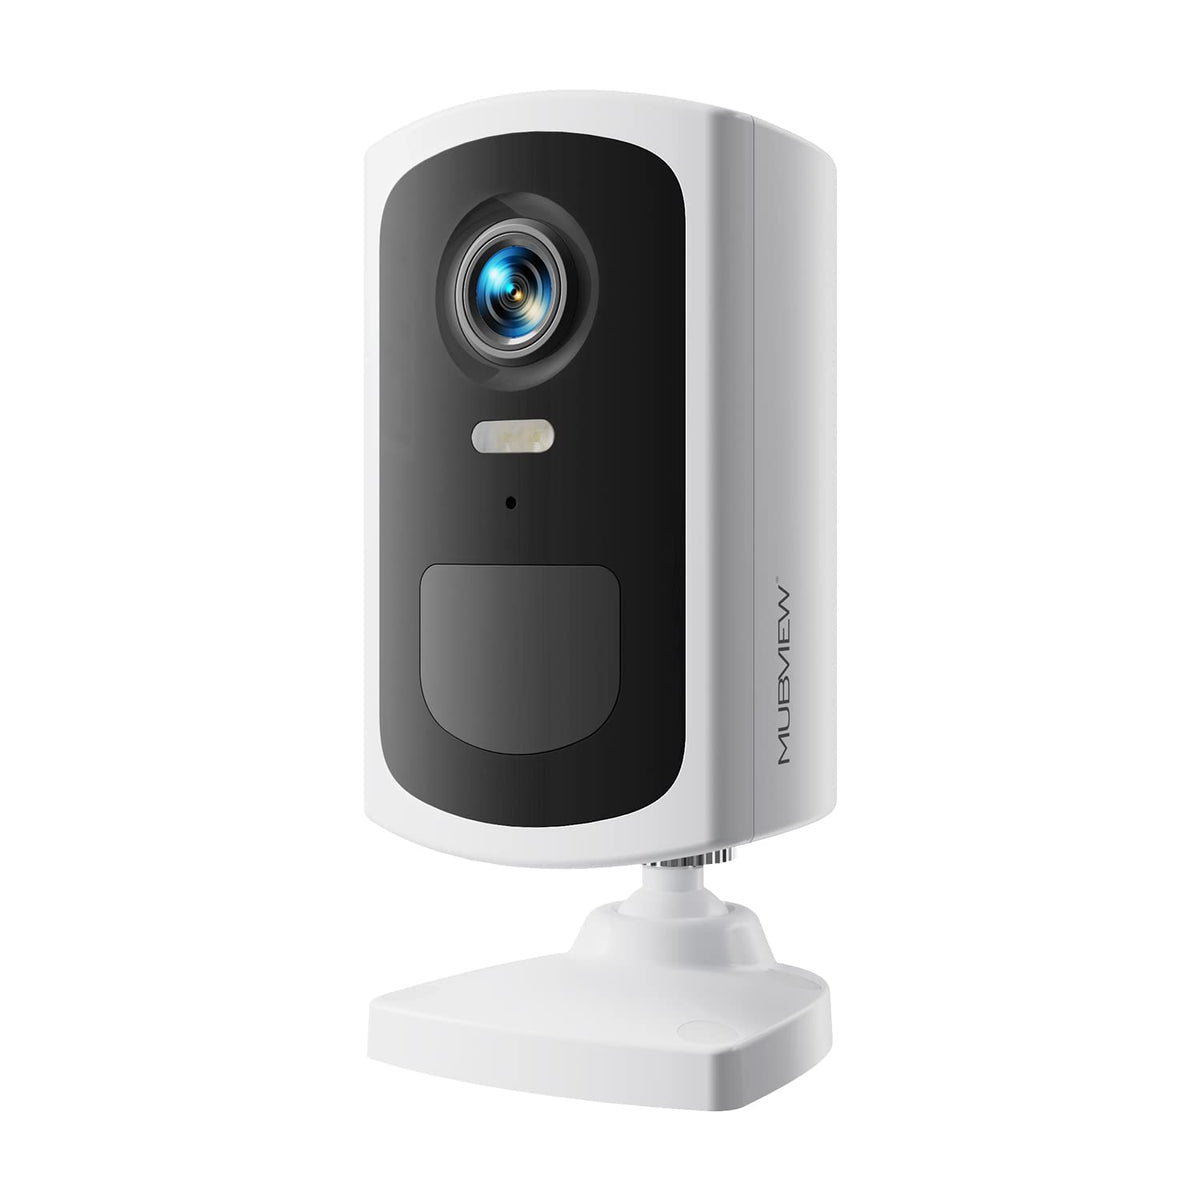  MUBVIEW Doorbell Camera Wireless with Chime, Video